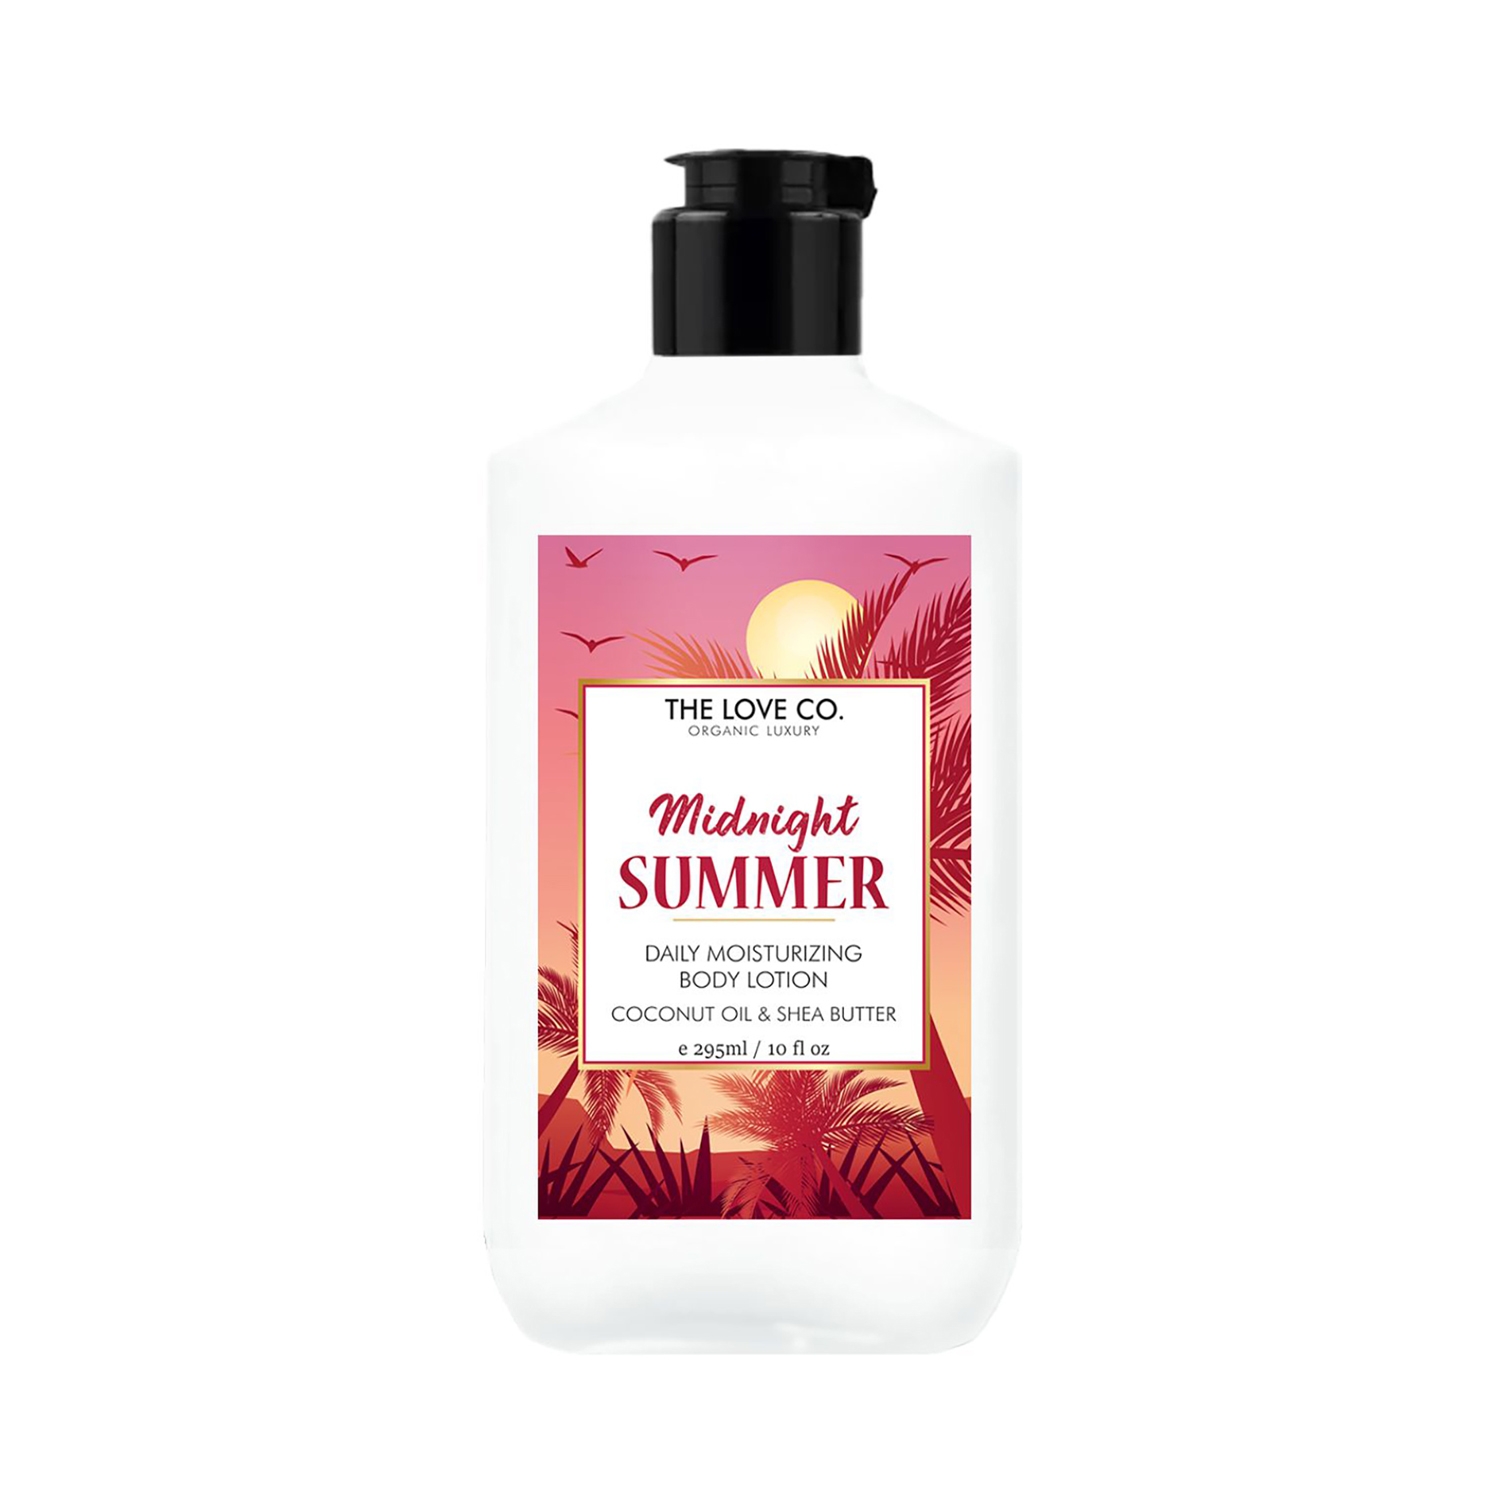 THE LOVE CO. | THE LOVE CO. Midnight Summer Daily Moisturizing Body Lotion (295ml)